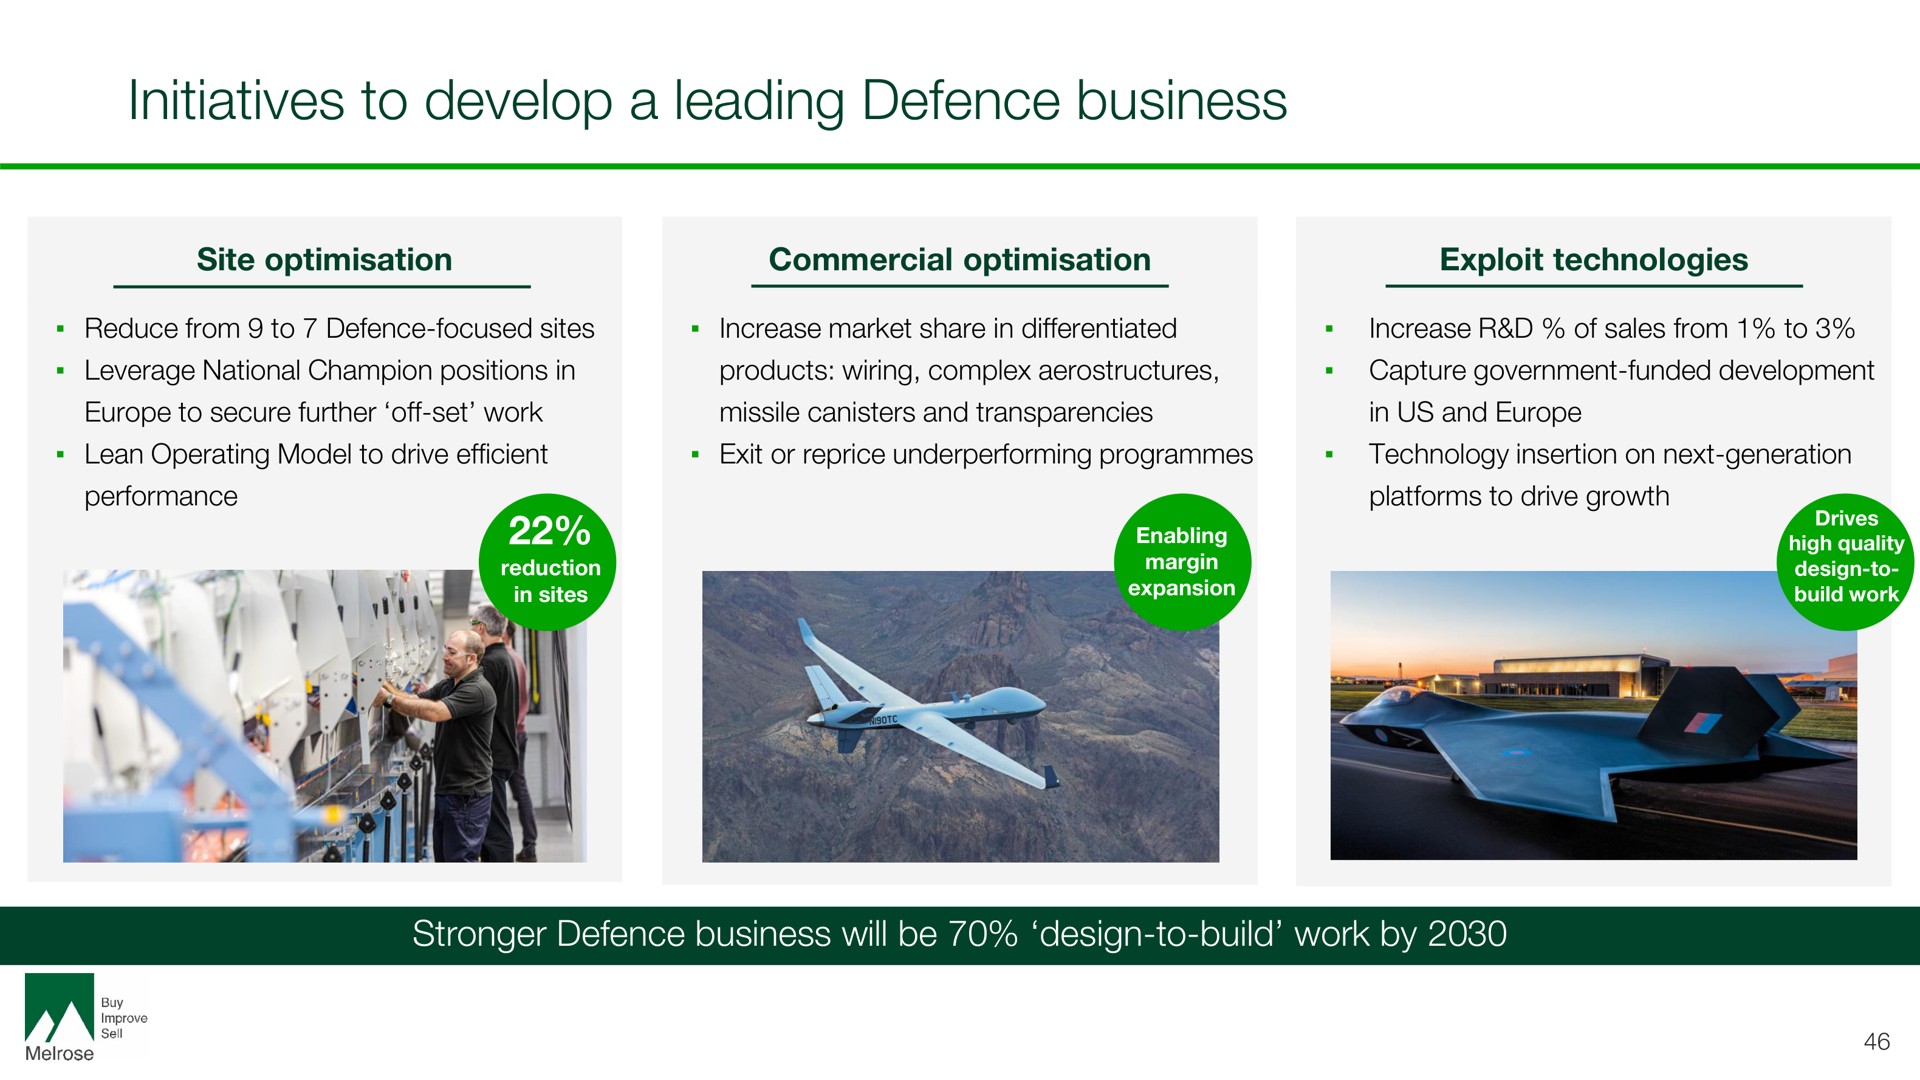 initiatives to develop a leading defence business | Melrose